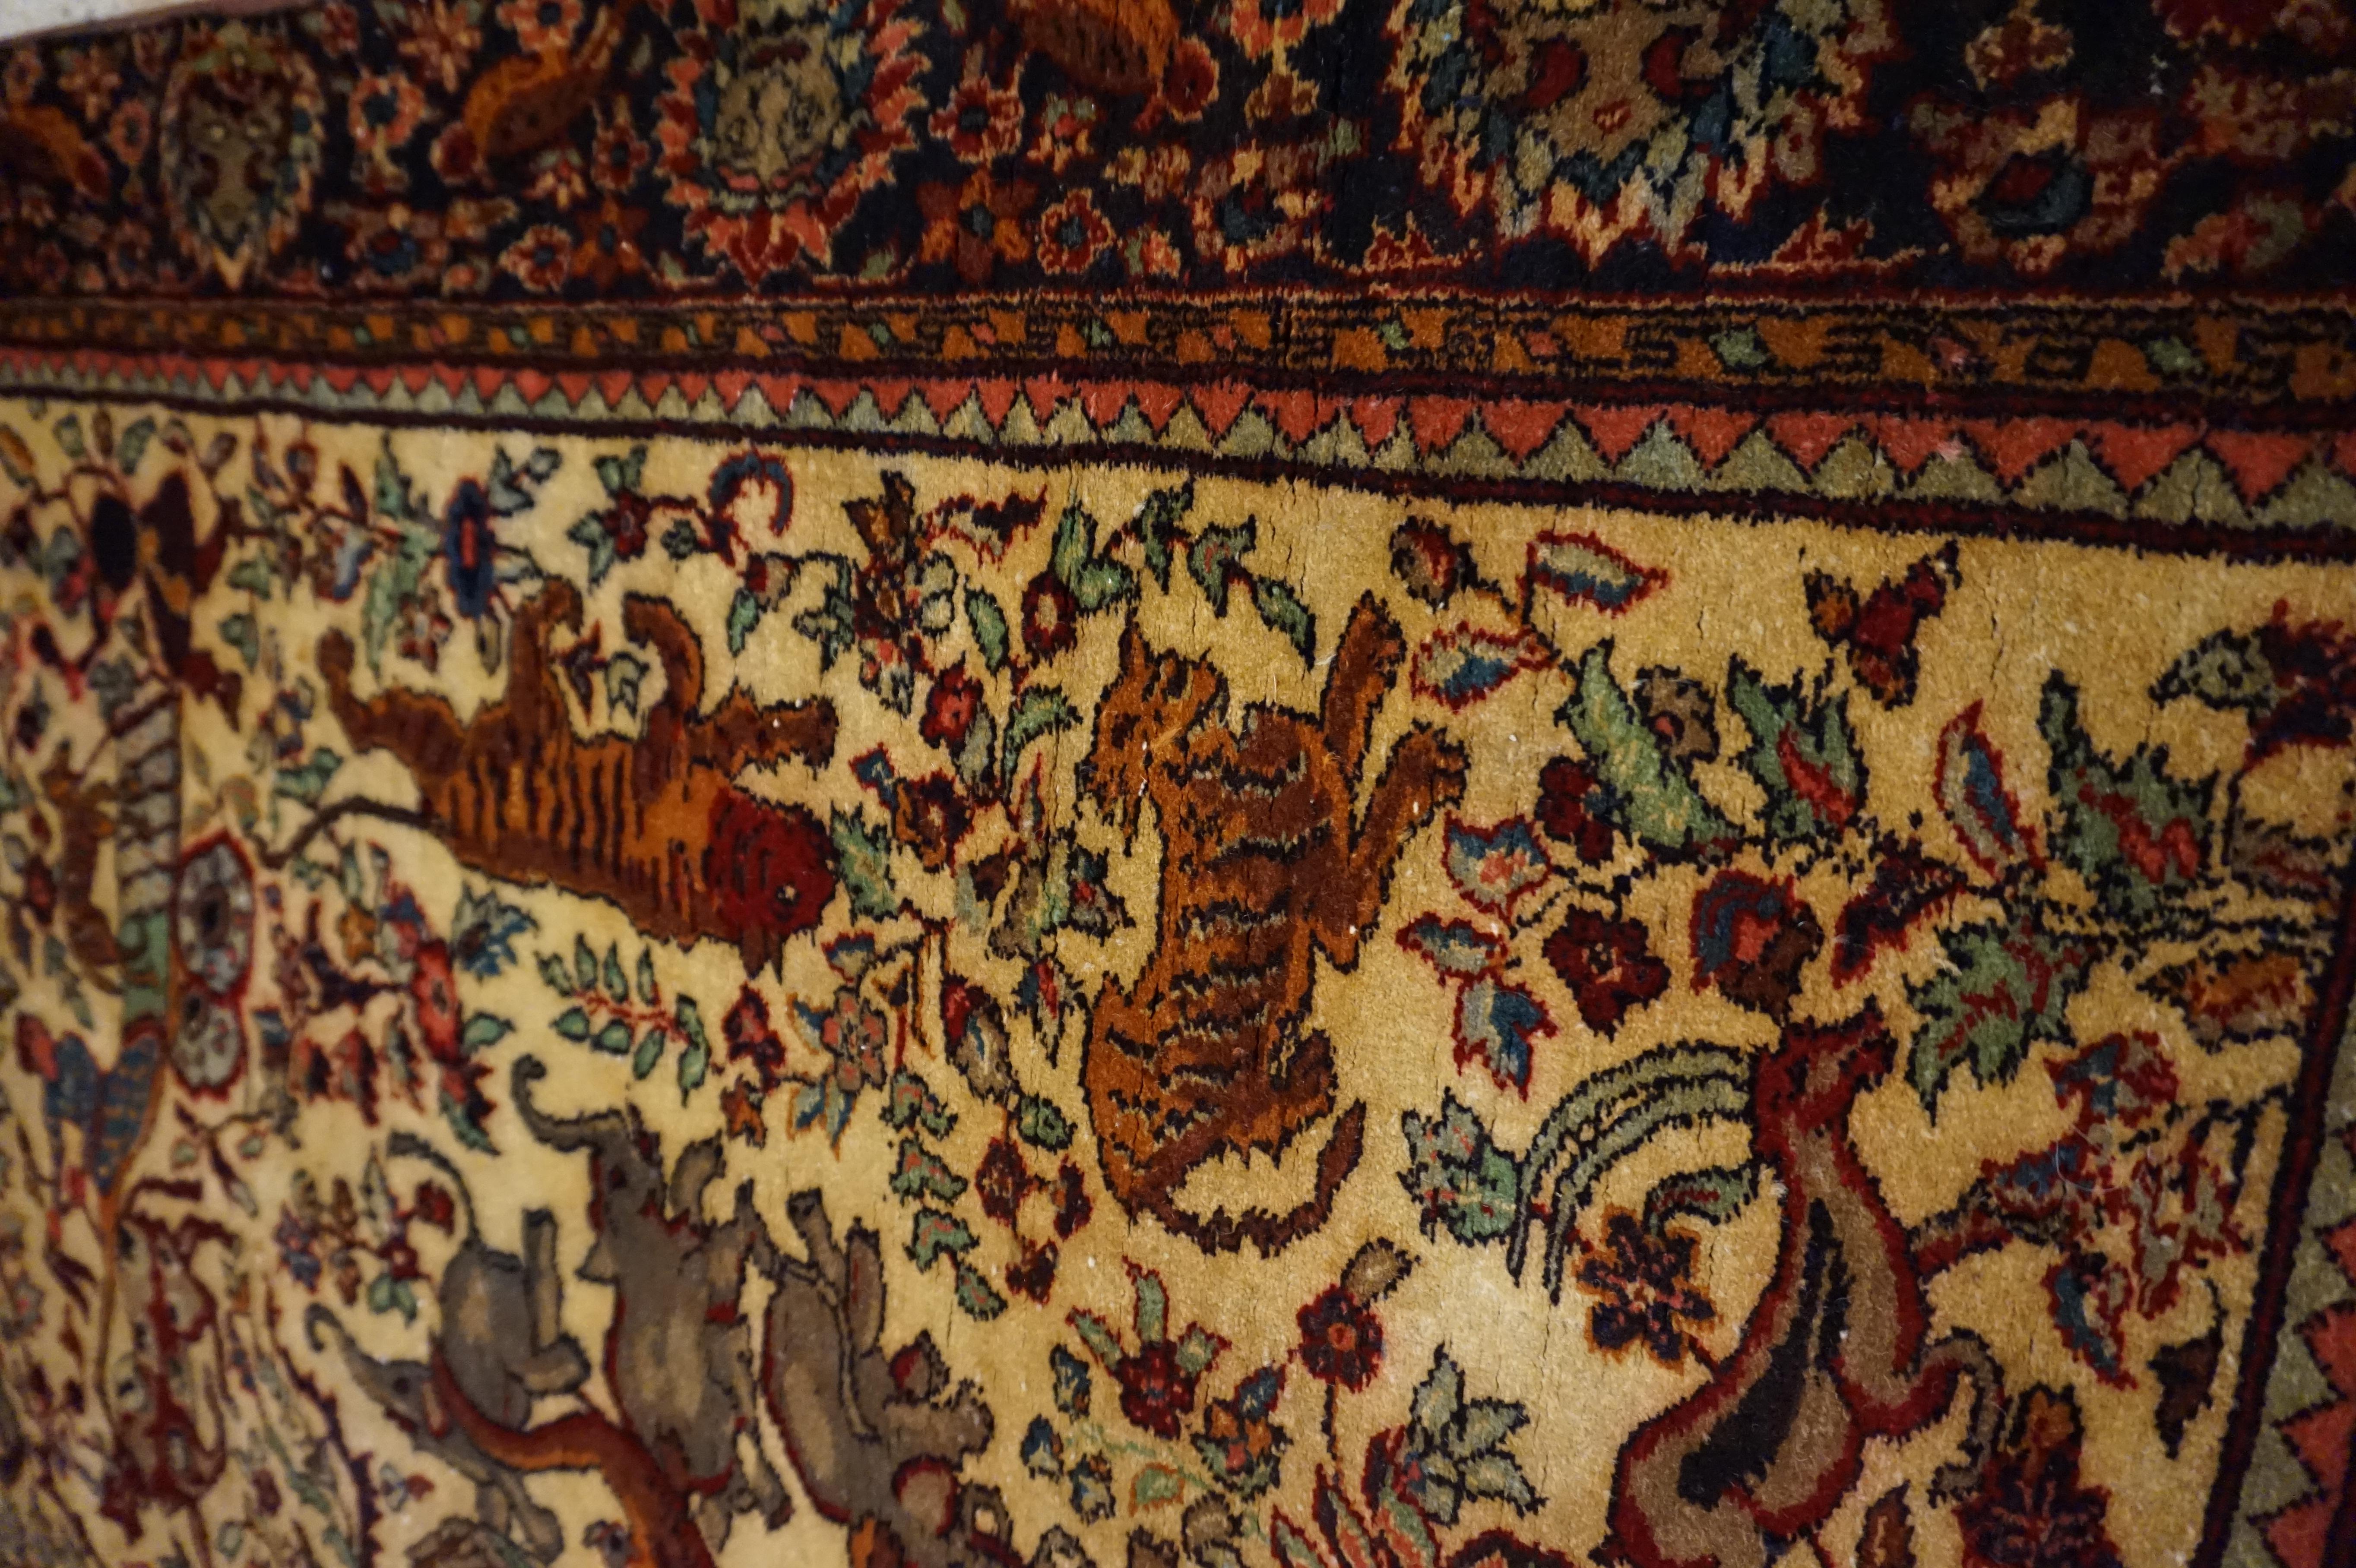 19th C. Agra Rug with Maharaja and Hunting Scene Tigers, Elephants Symbolism In Good Condition For Sale In Vancouver, British Columbia